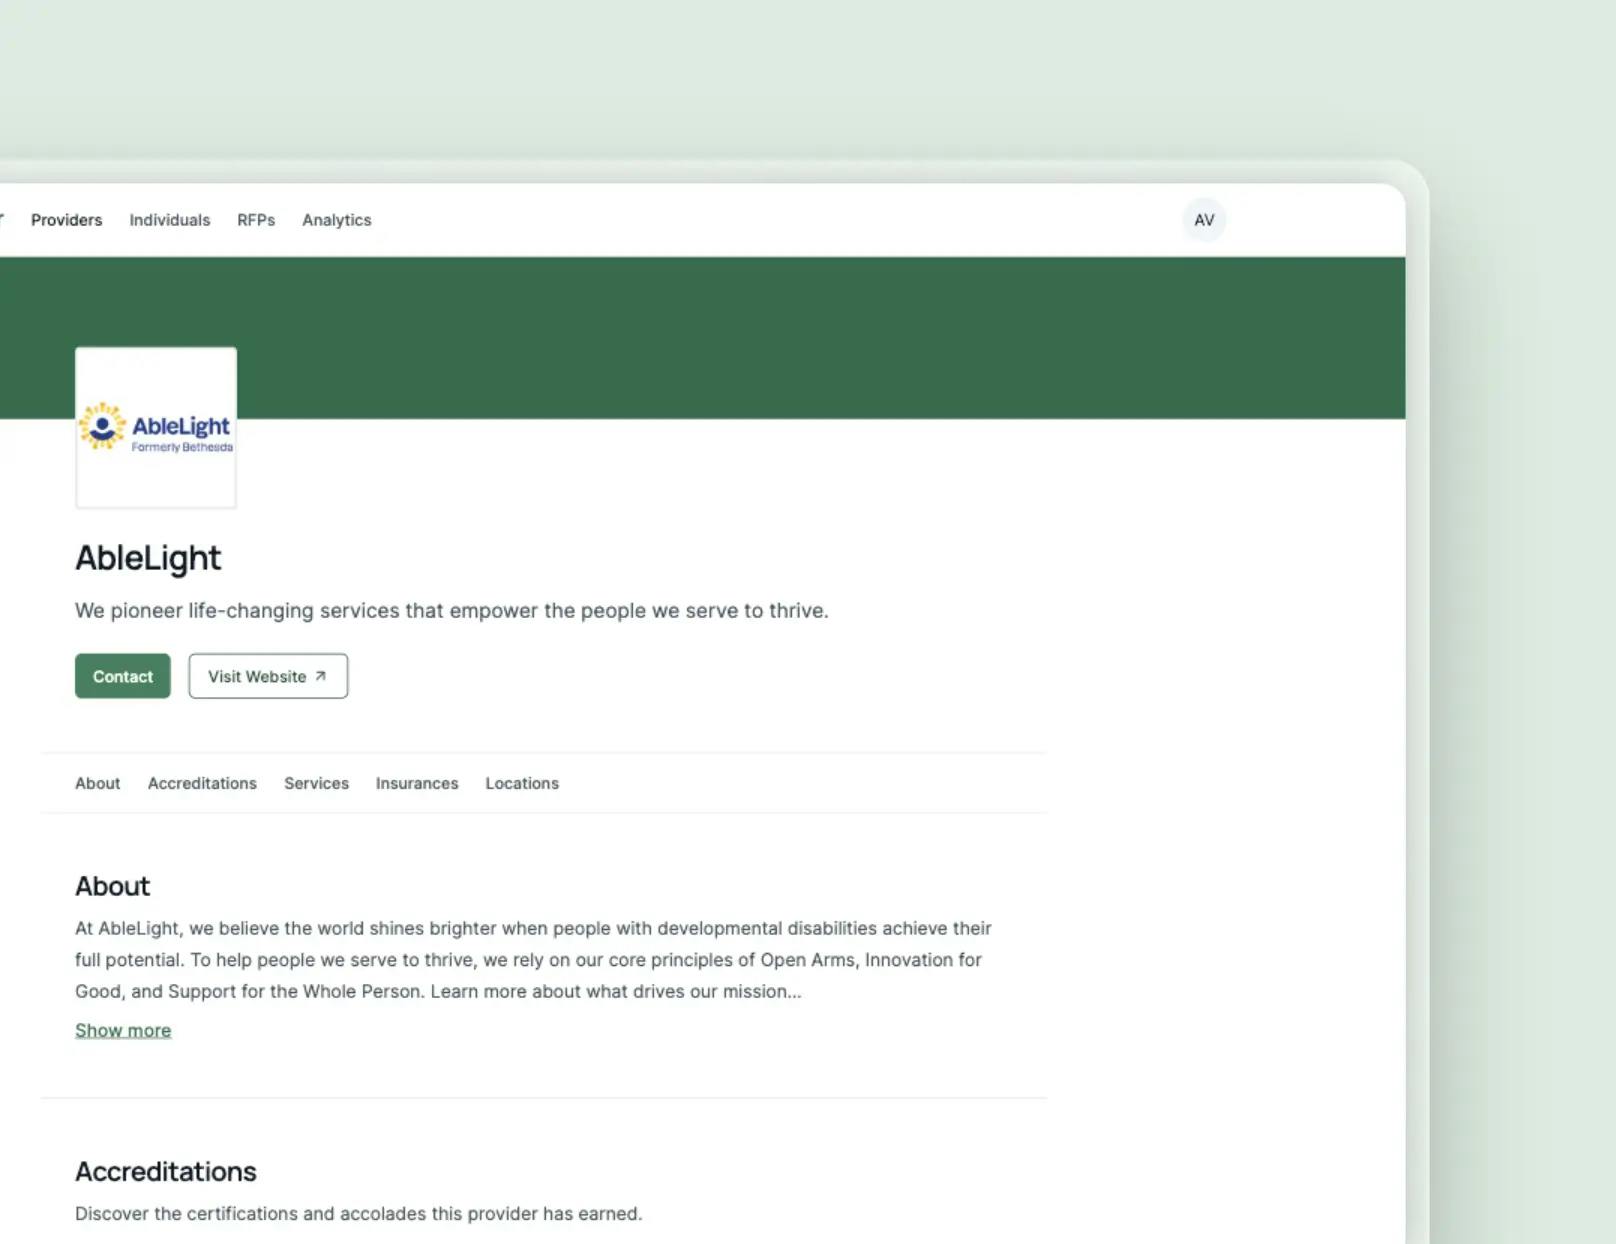 A screenshot of a provider's profile on Wayfinder's directory, set against a light green background.